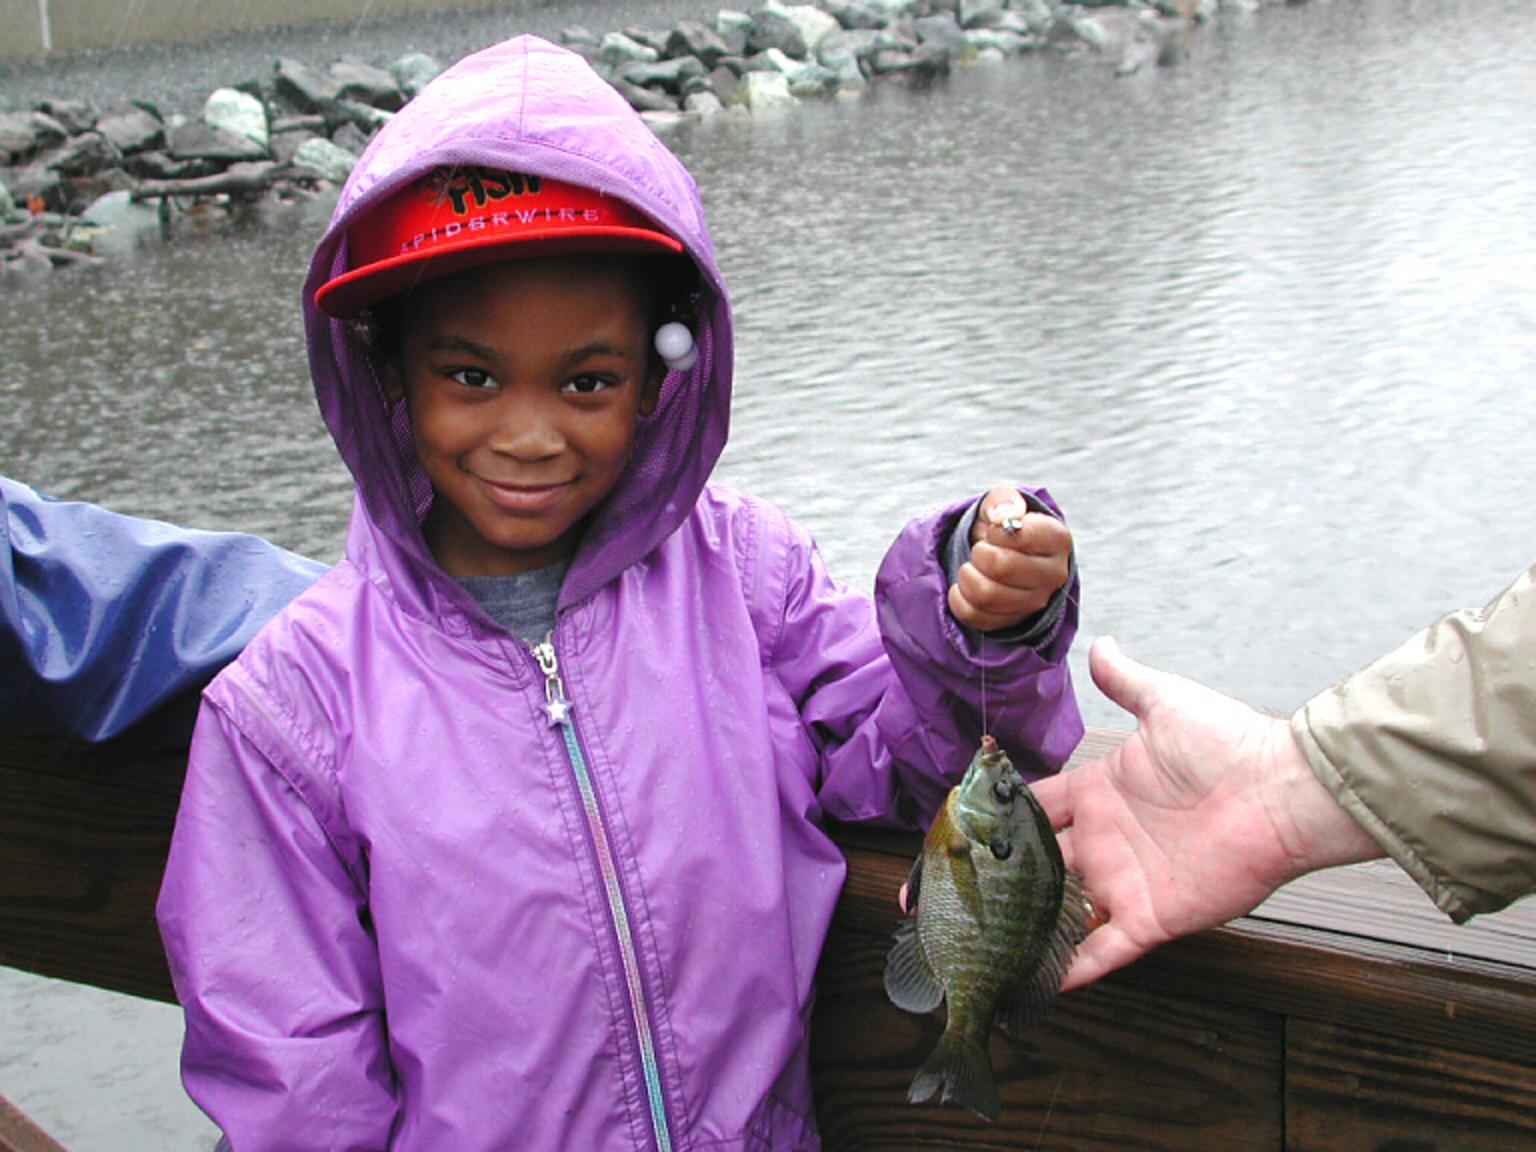 https://pixnio.com/free-images/sport/fishing-and-hunting/young-african-american-girl-smile-holding-fishing-catch.jpg